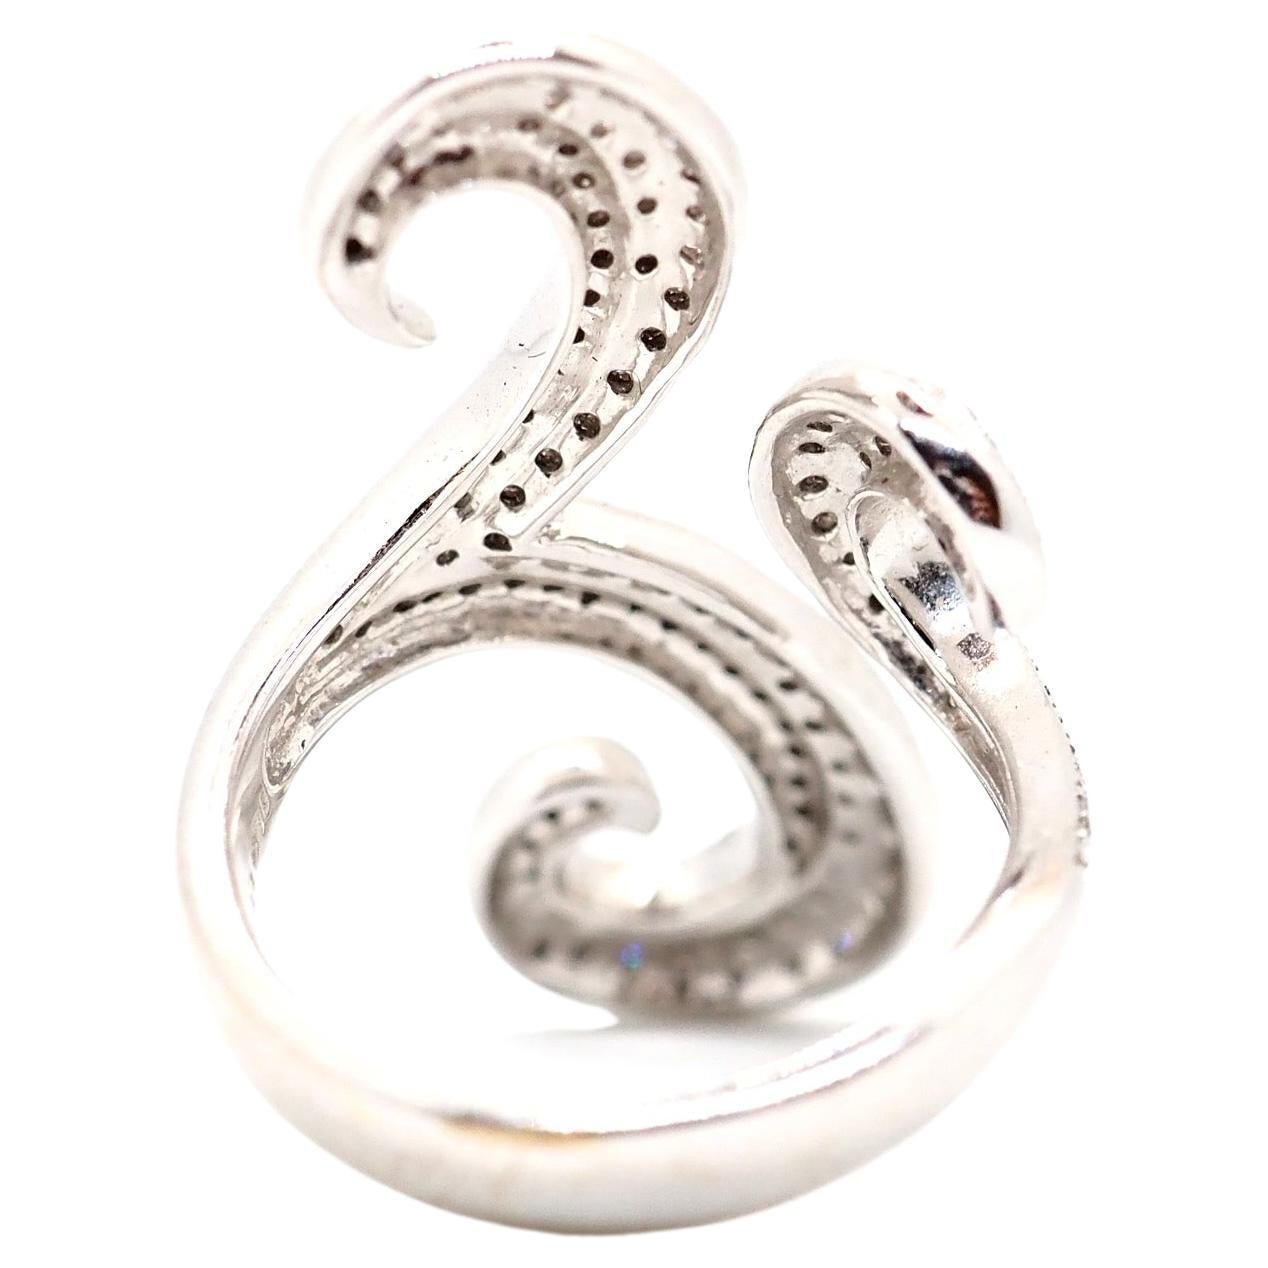 A stunning diamond ring made of 18K white gold. A beautiful spiral design of this curved ring makes it special. This ring is perfect for any special occasion. All paved with diamonds, approximate weight of the stones is 1.4 carat.

Total weight: 10